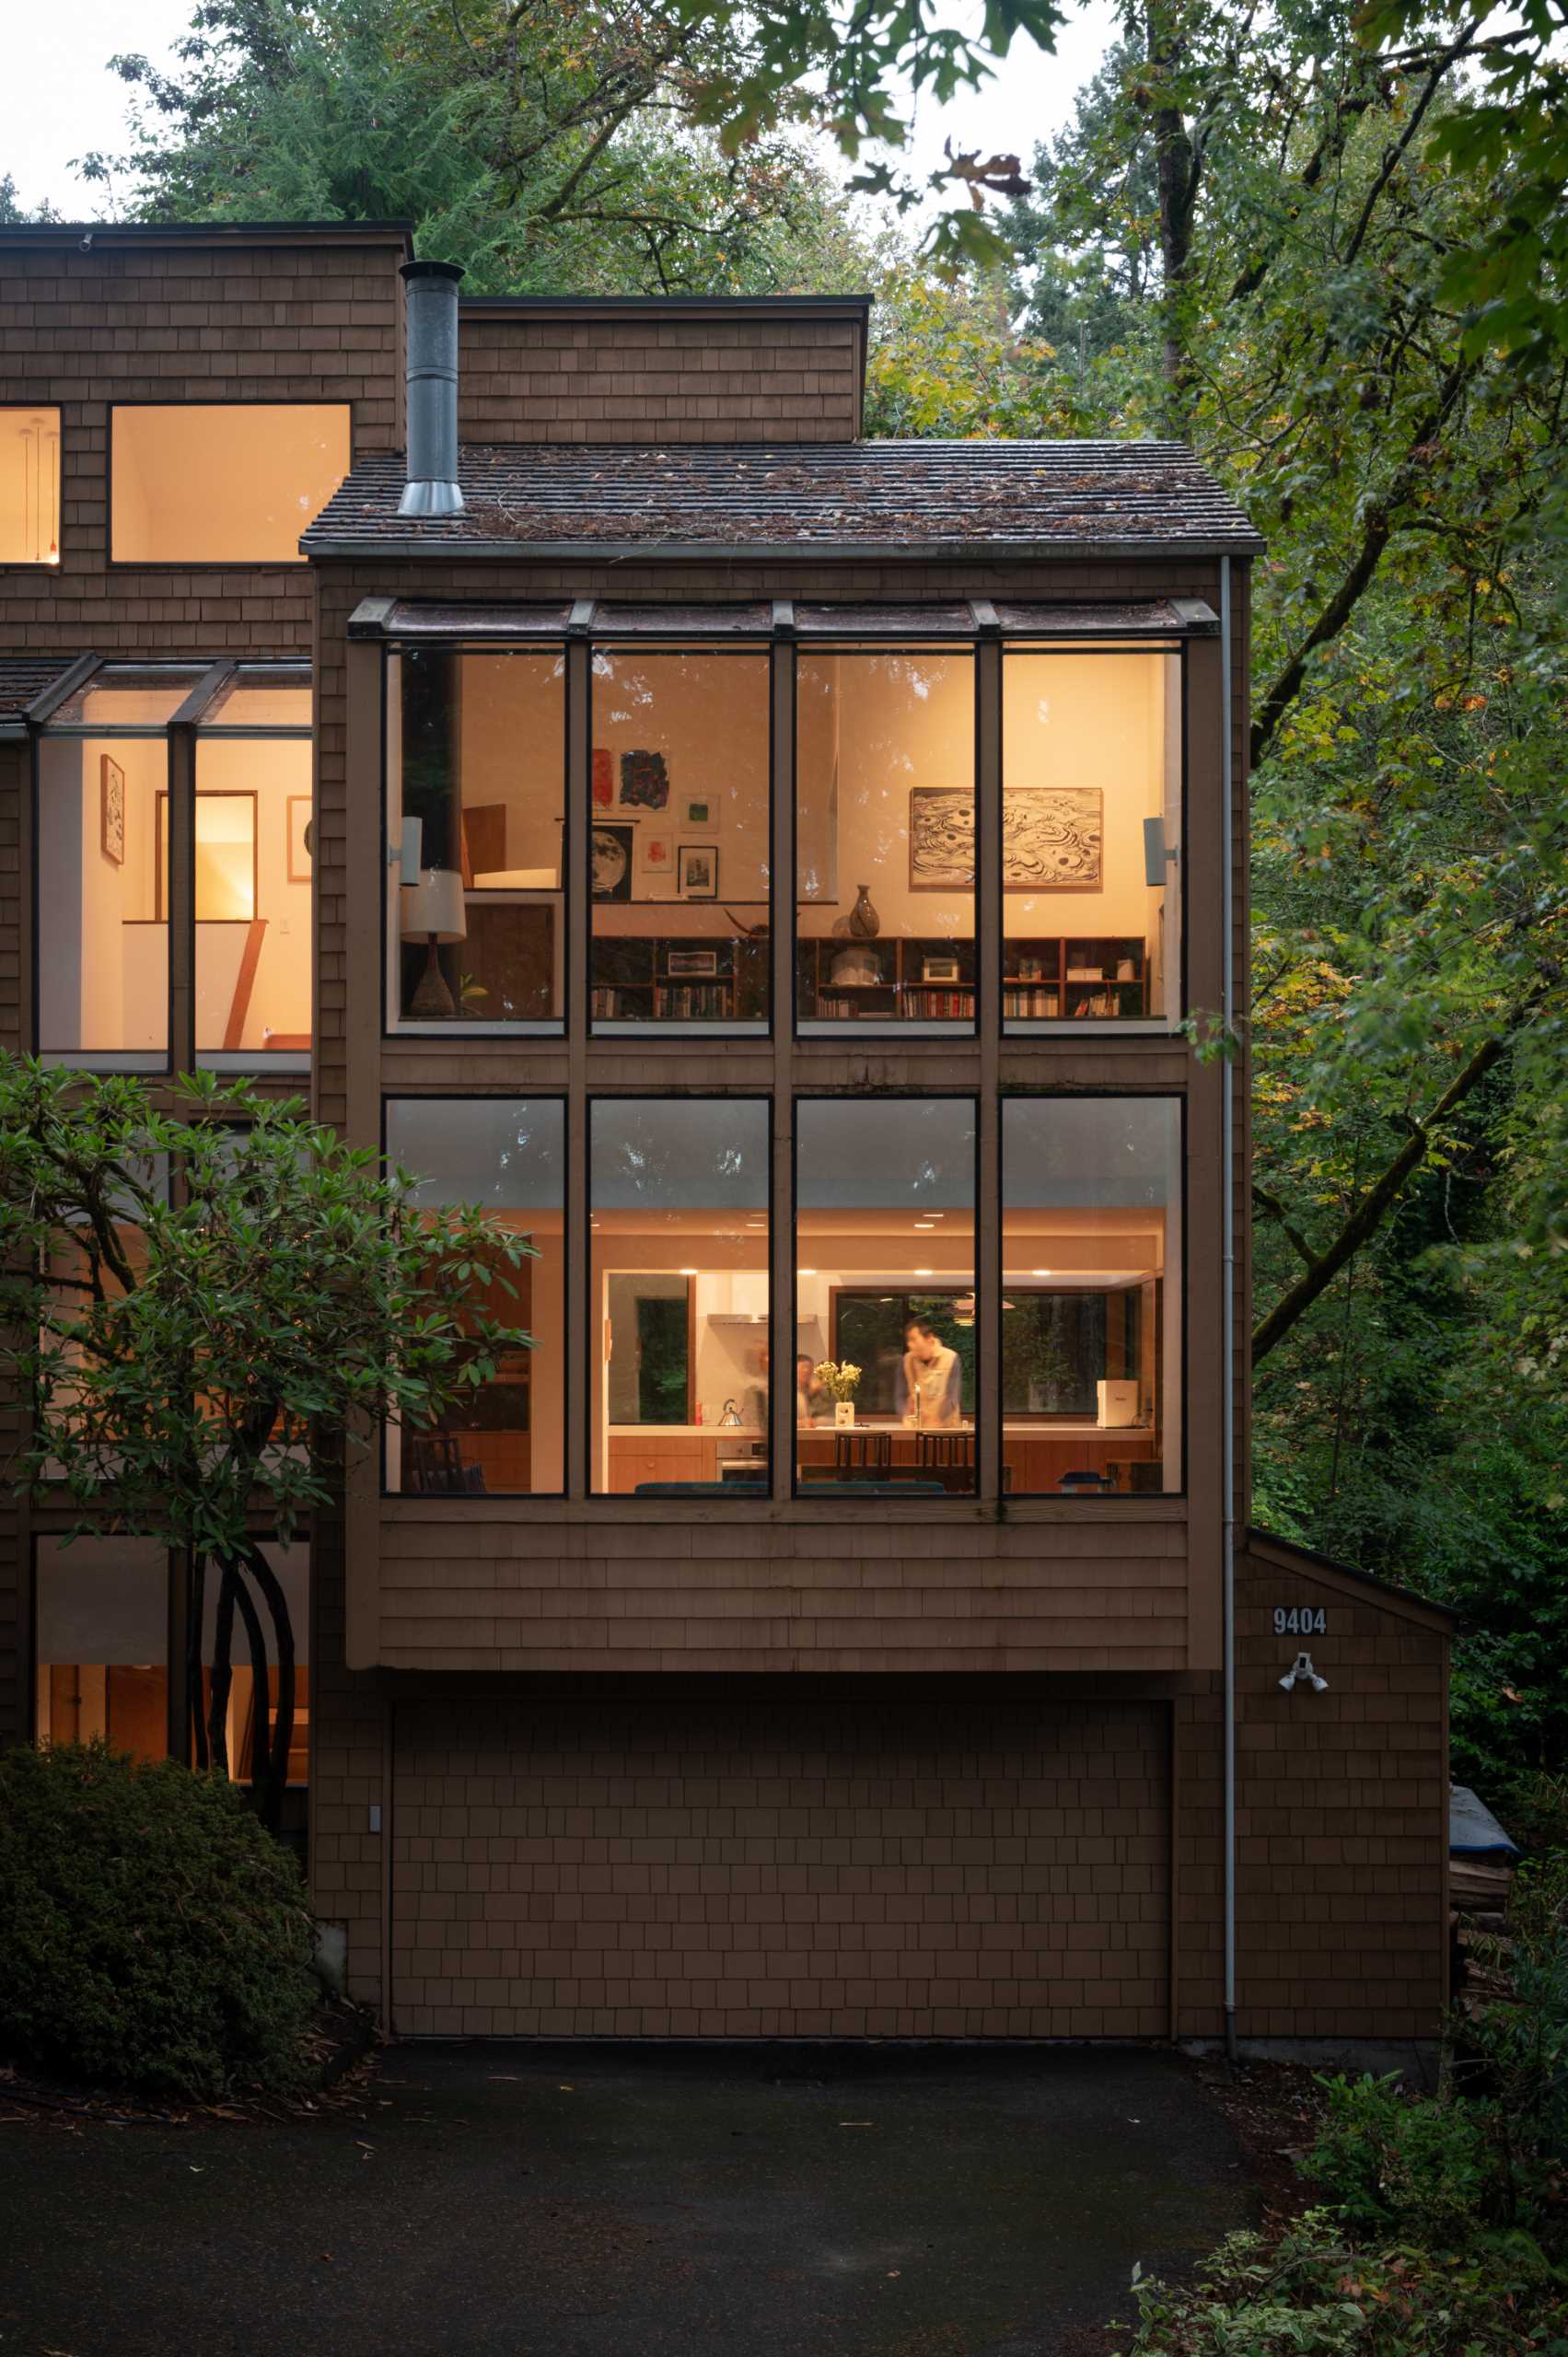 A 1970s home with a wood shingle and glass exterior.